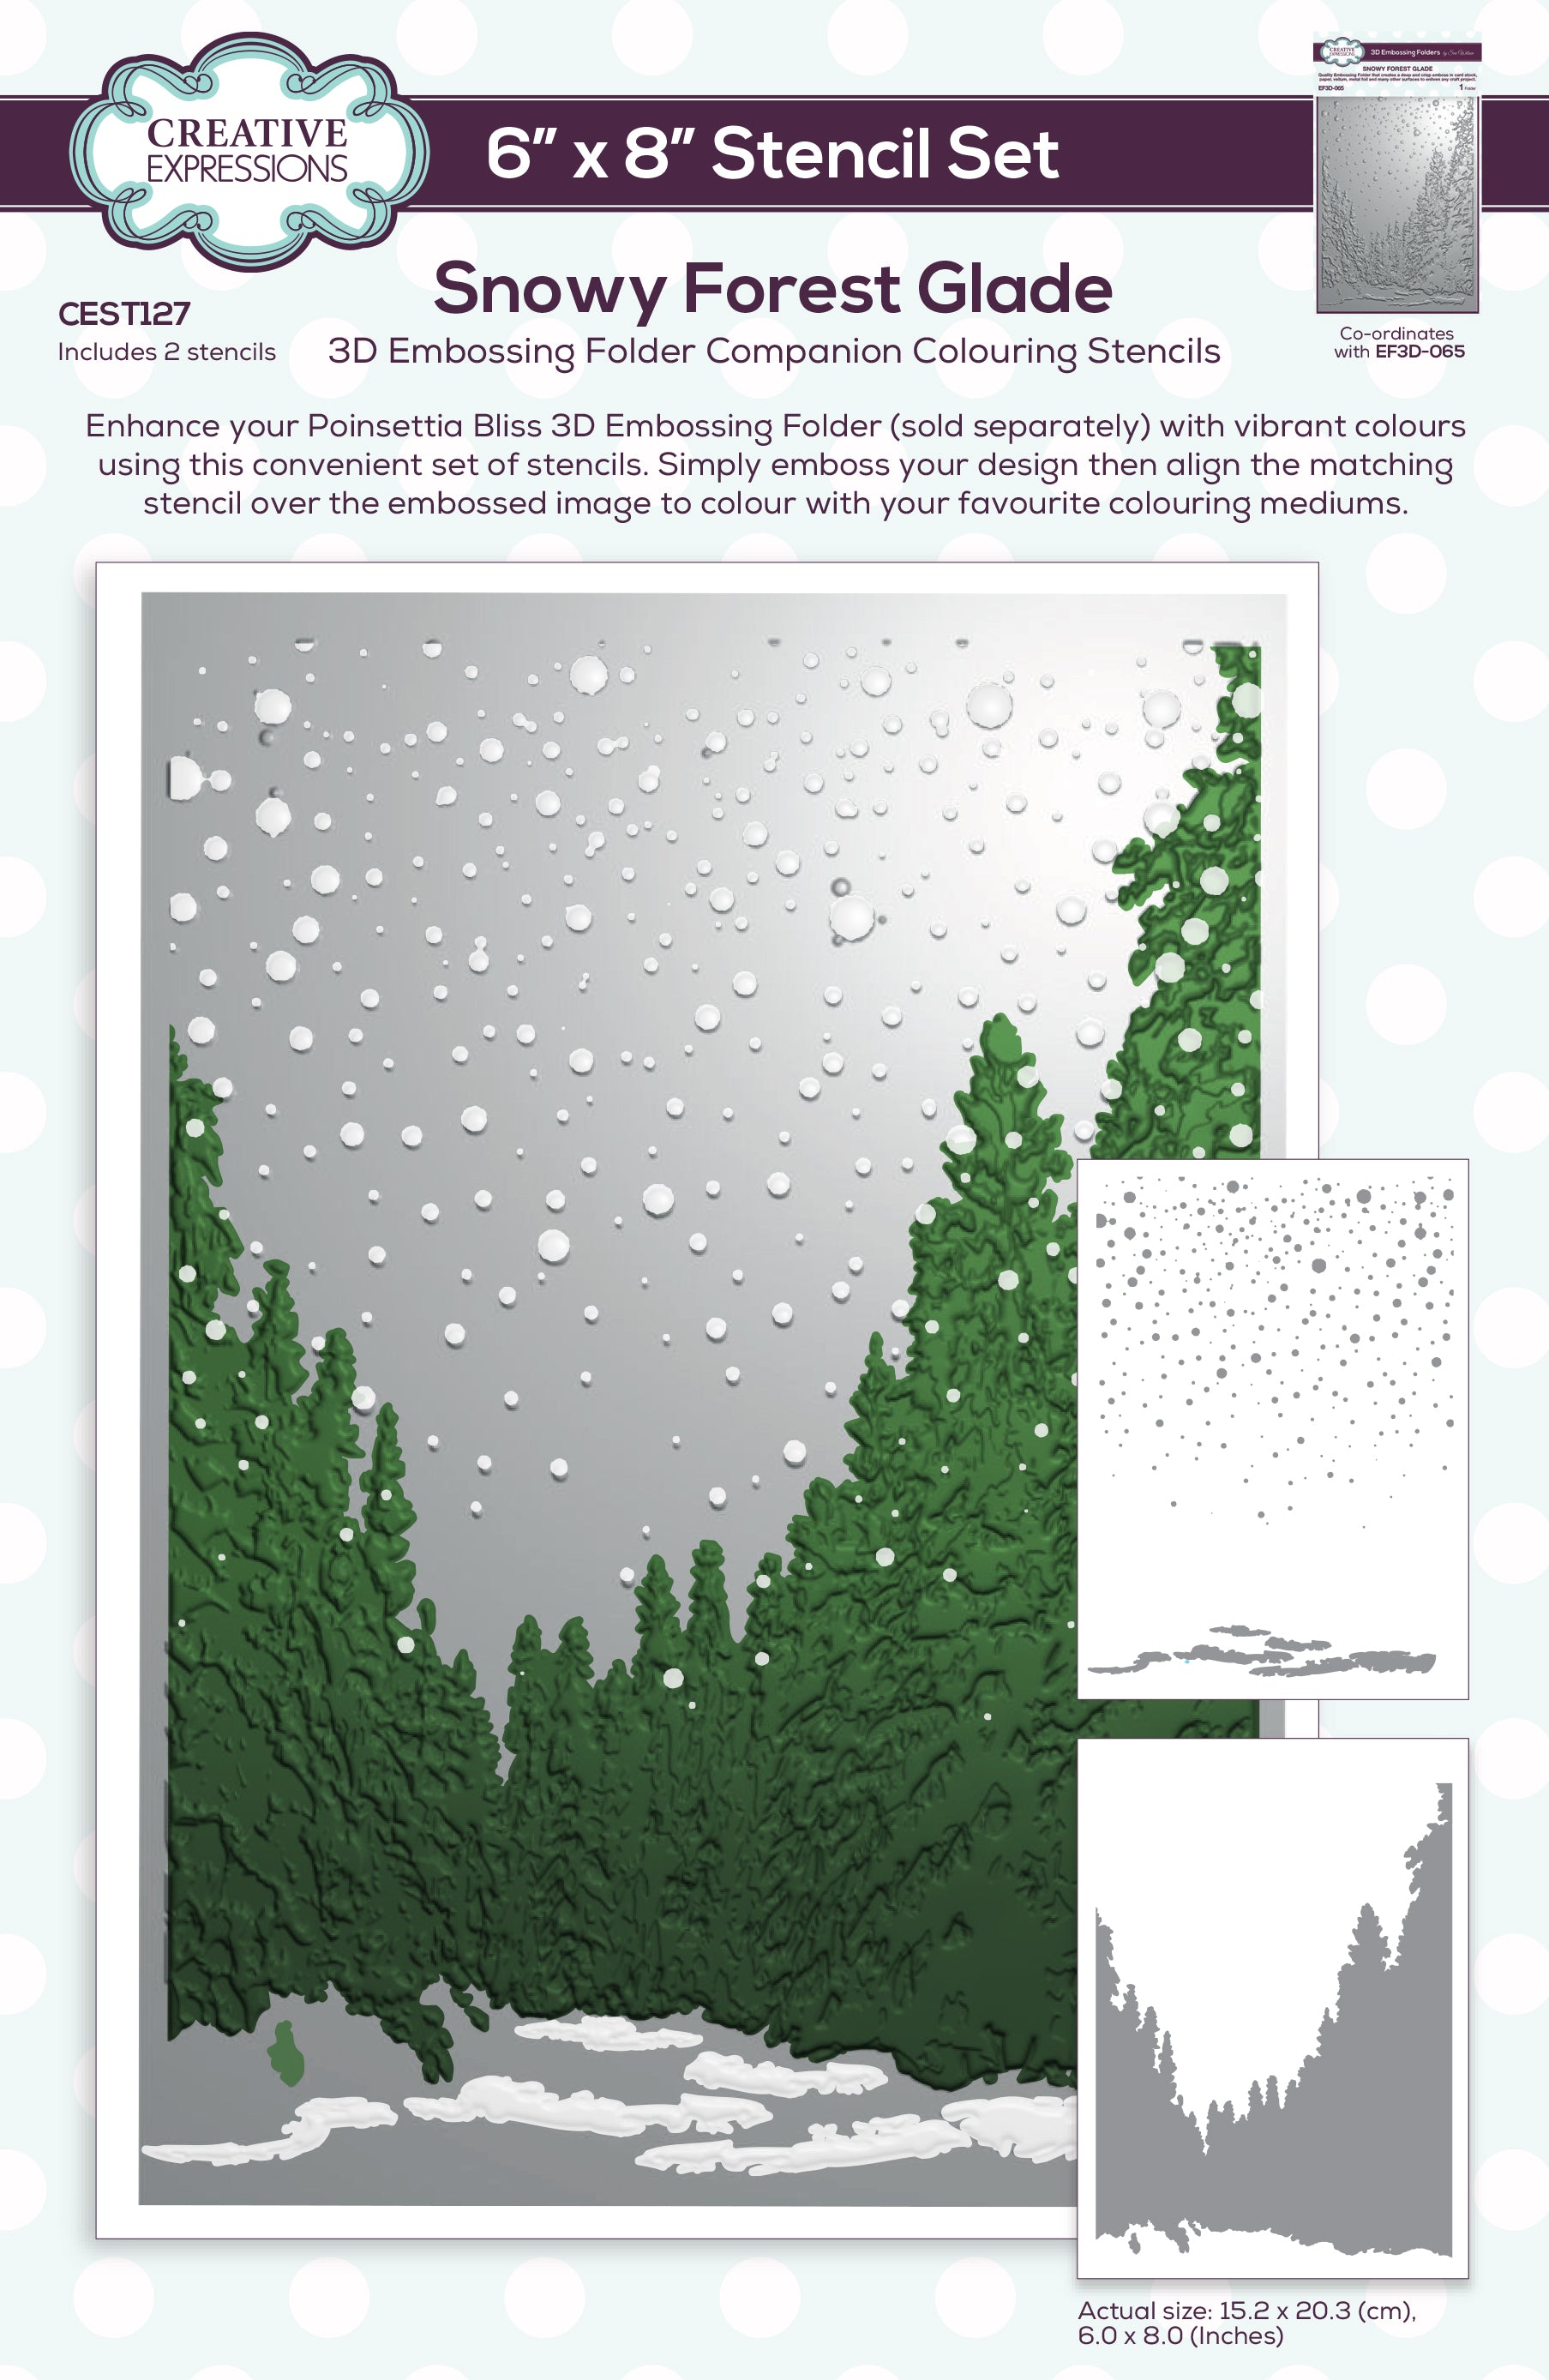 Creative Expressions Snowy Forest Glade Companion Colouring Stencil Set 6 in x 8 in 2pk